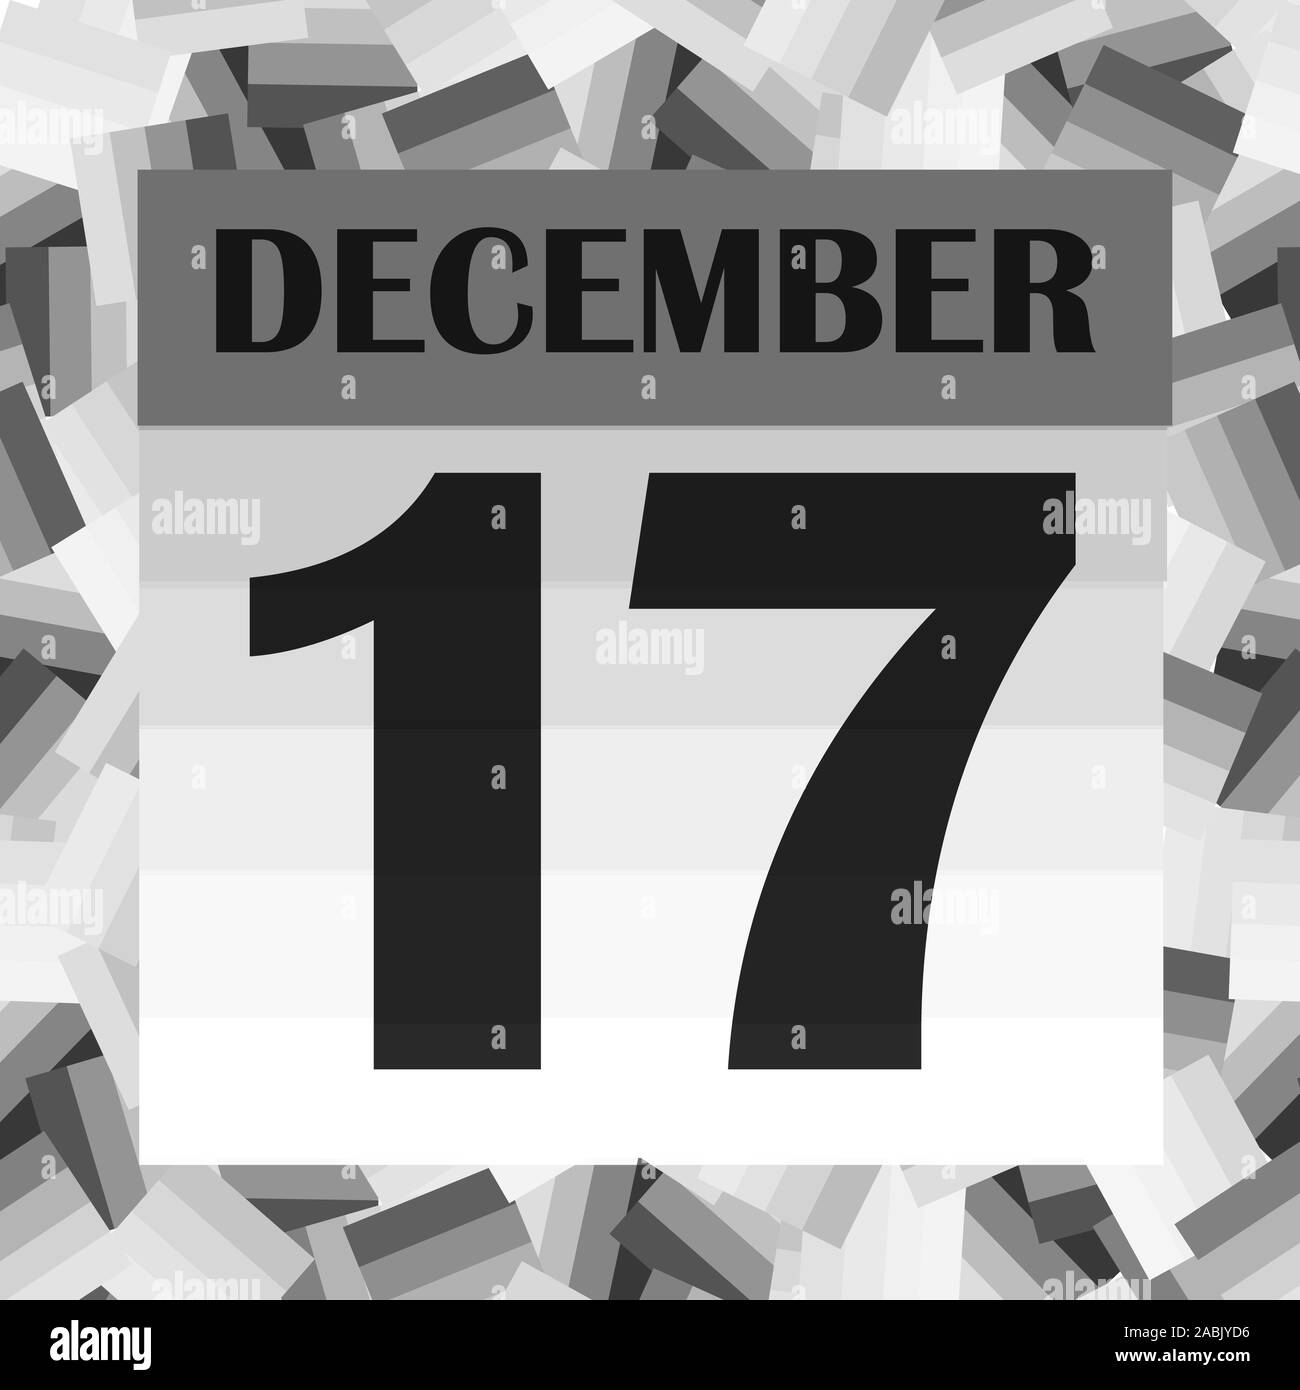 December 17 icon. For planning important day. Banner for holidays and special days. Seventeenth of december icon. Illustration in black and white colors. Stock Photo